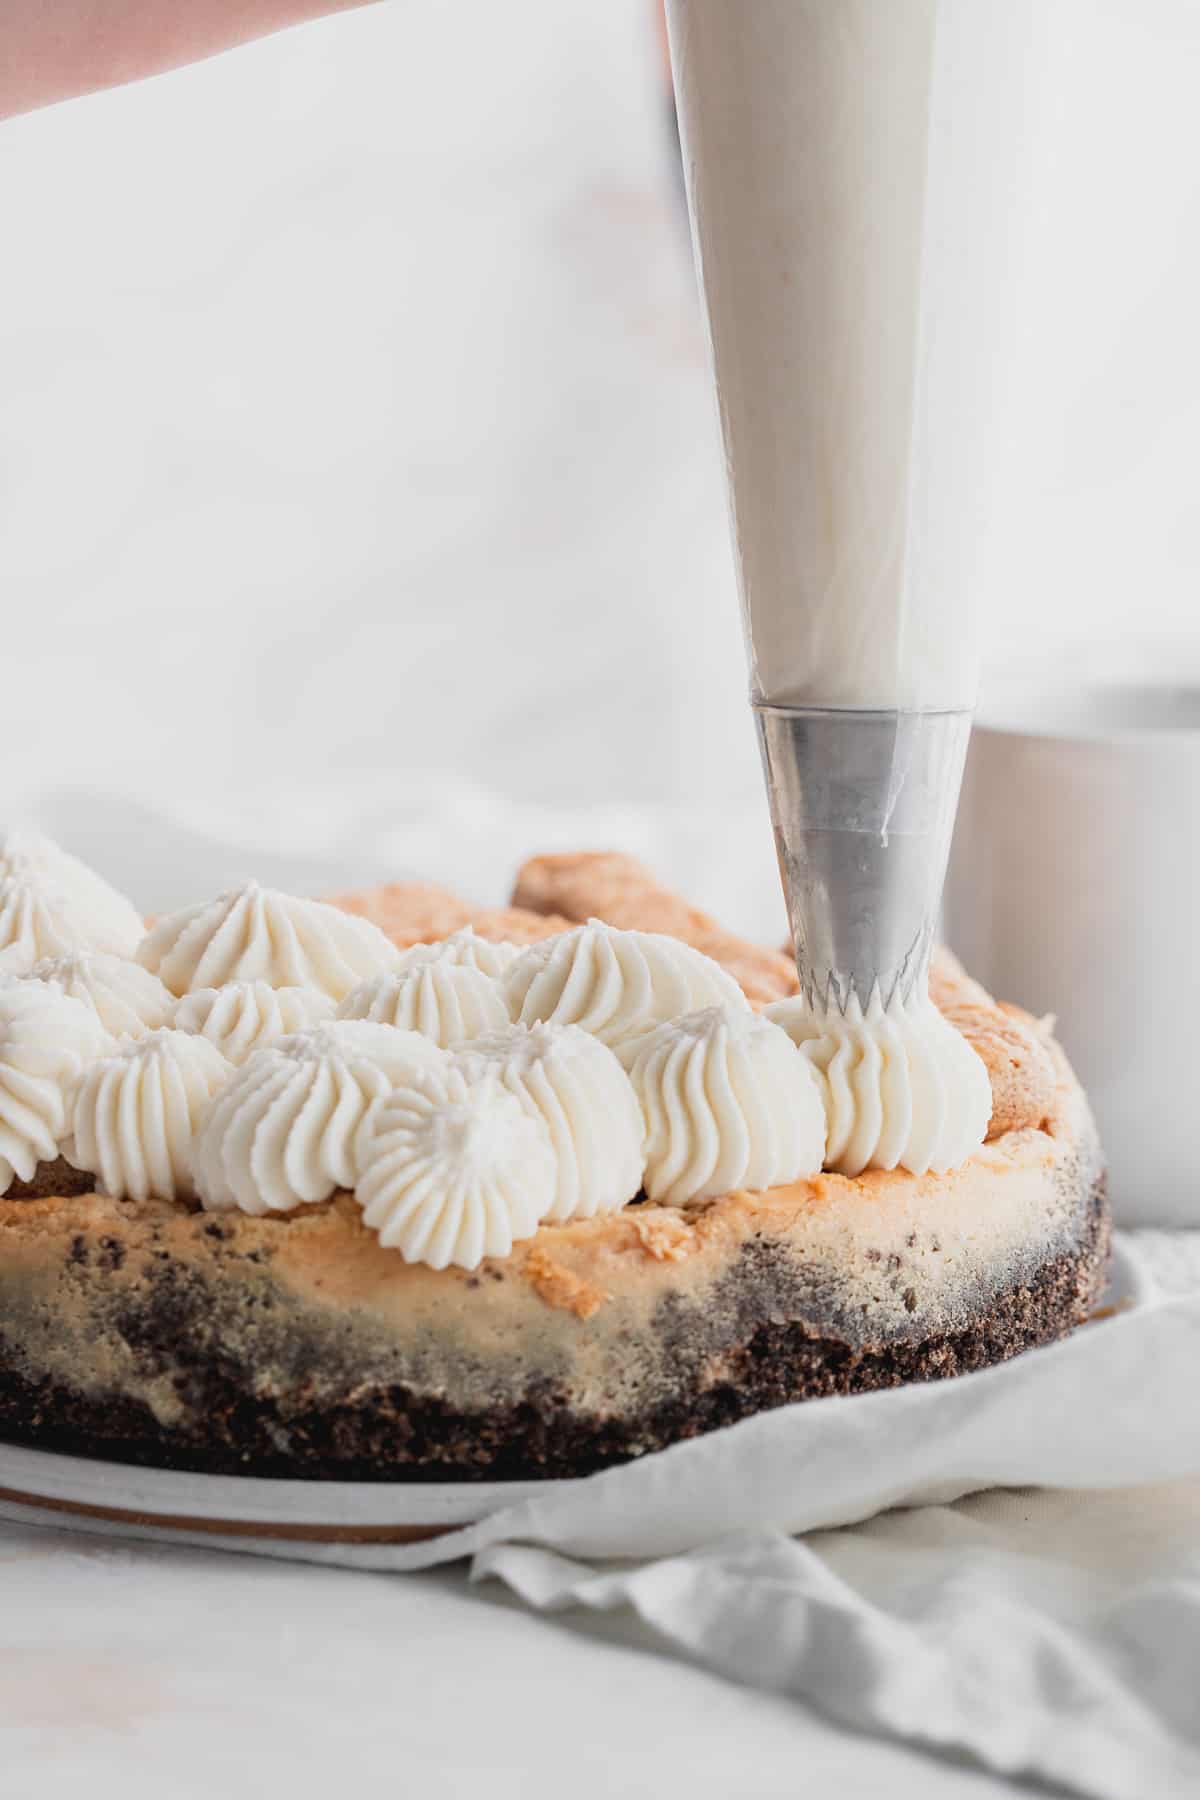 Piping whipped cream cheese on top of cheesecake.